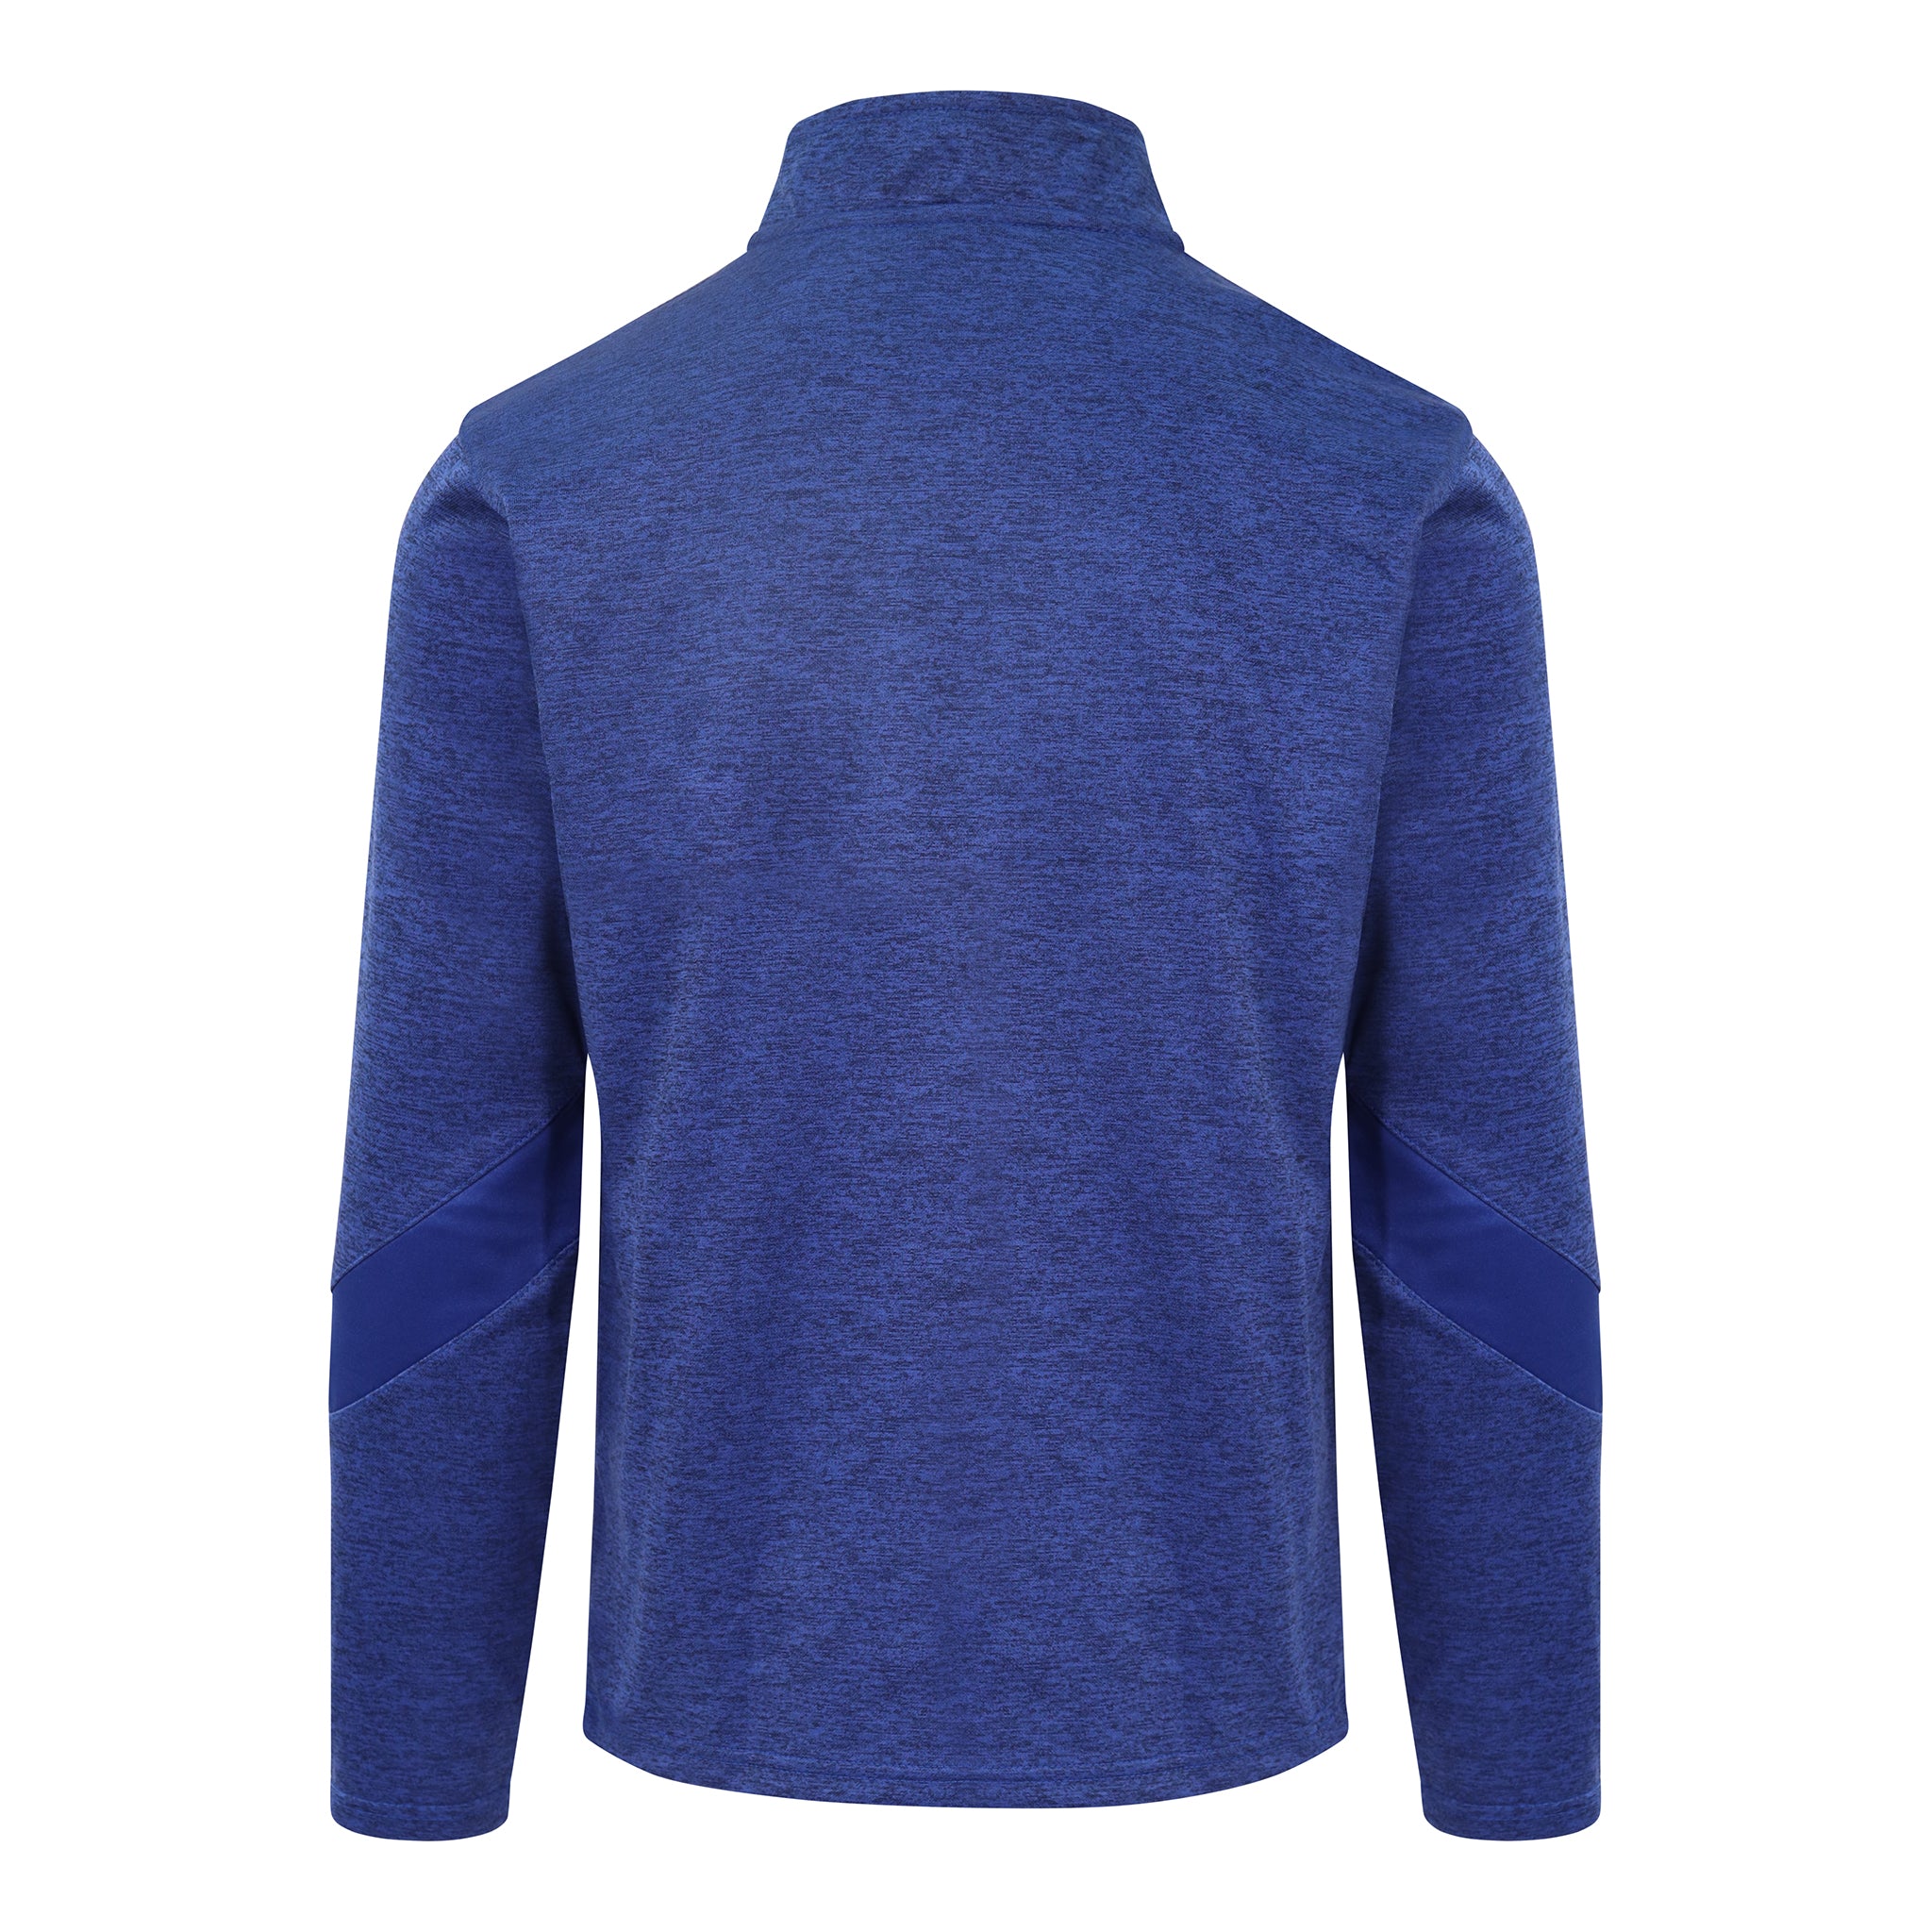 Mc Keever Core 22 1/4 Zip Top - Youth - Royal